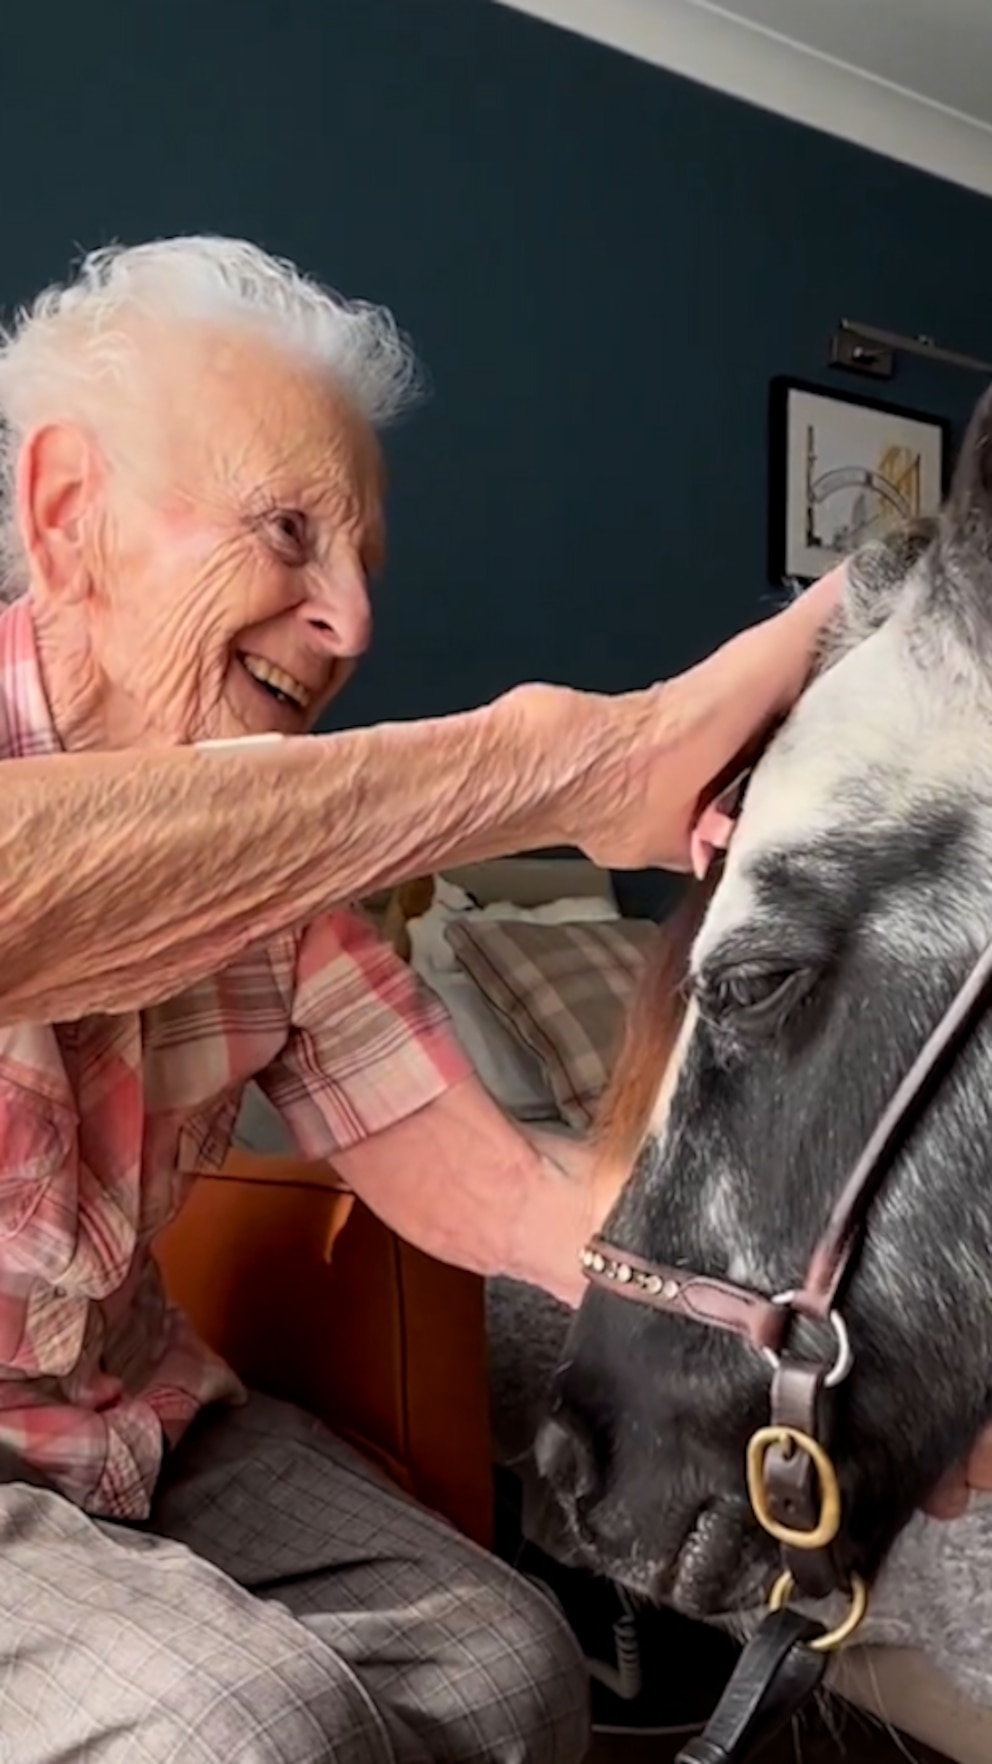 Watch How a Special Therapy Pony Brings Joy to Elderly People at Their Bedsides